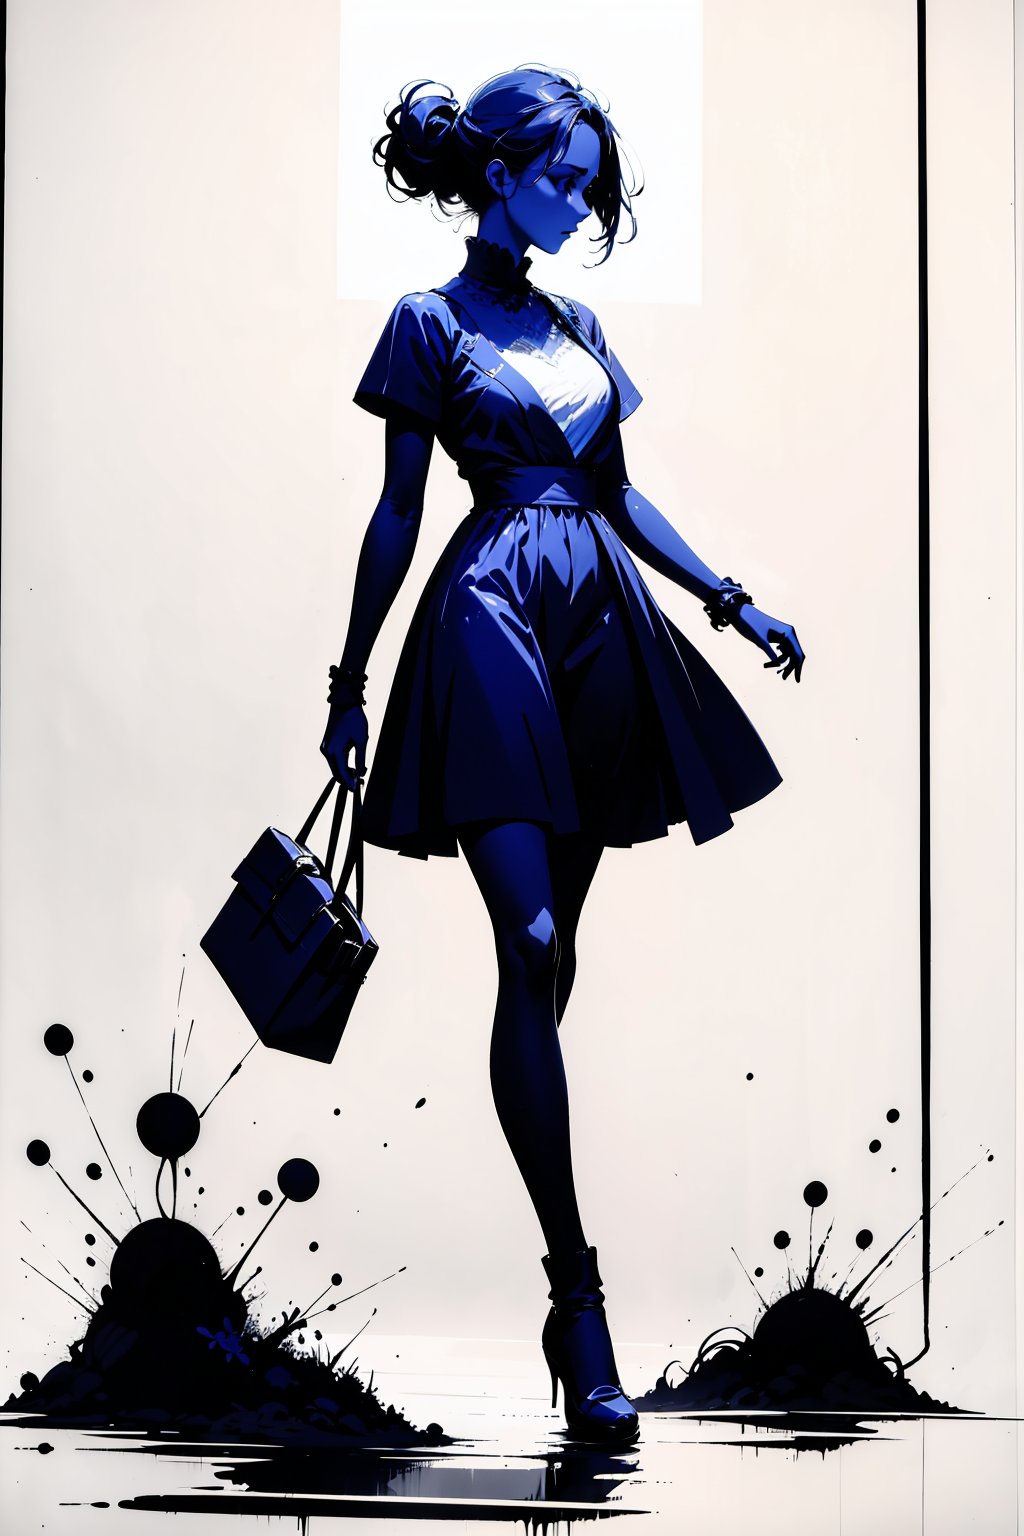 black silhouette depicting a beautiful and elegant woman walking alone, white image background, ink brush strokes, monochrome, INK art.,masterpiece